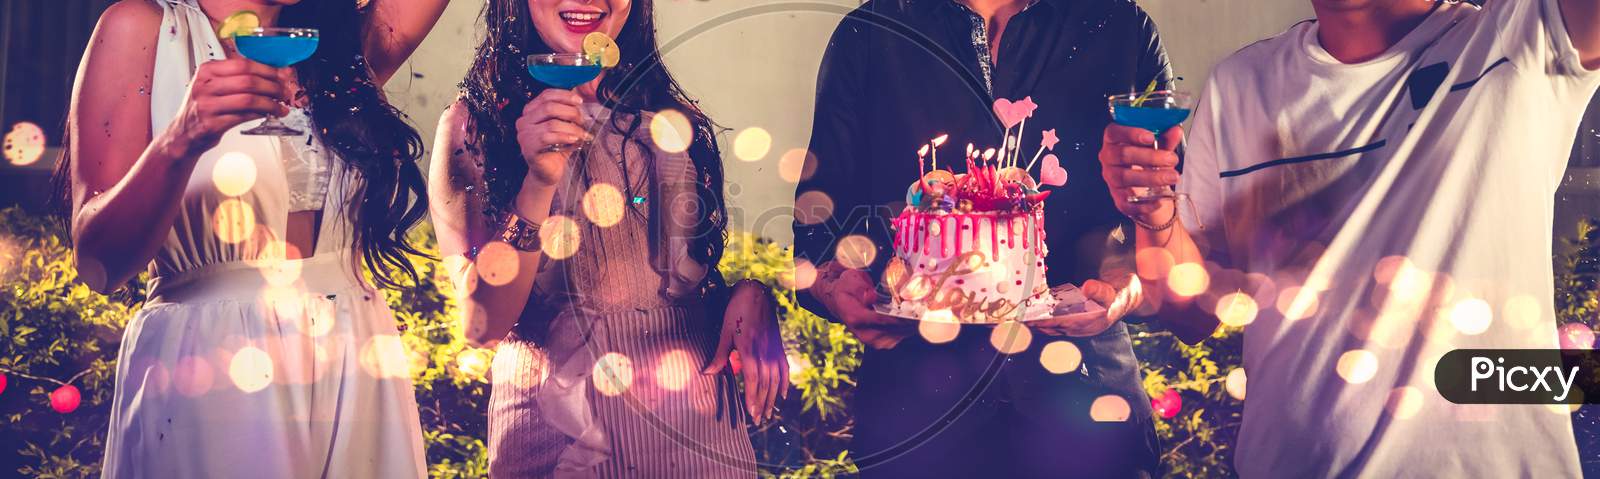 Closeup Lower Body Friends Group Having Outdoor Birthday Party At Night Club With Birthday Cake. Event And Anniversary Concept. People Lifestyles And Friendship Forever In Night Club Banner Background